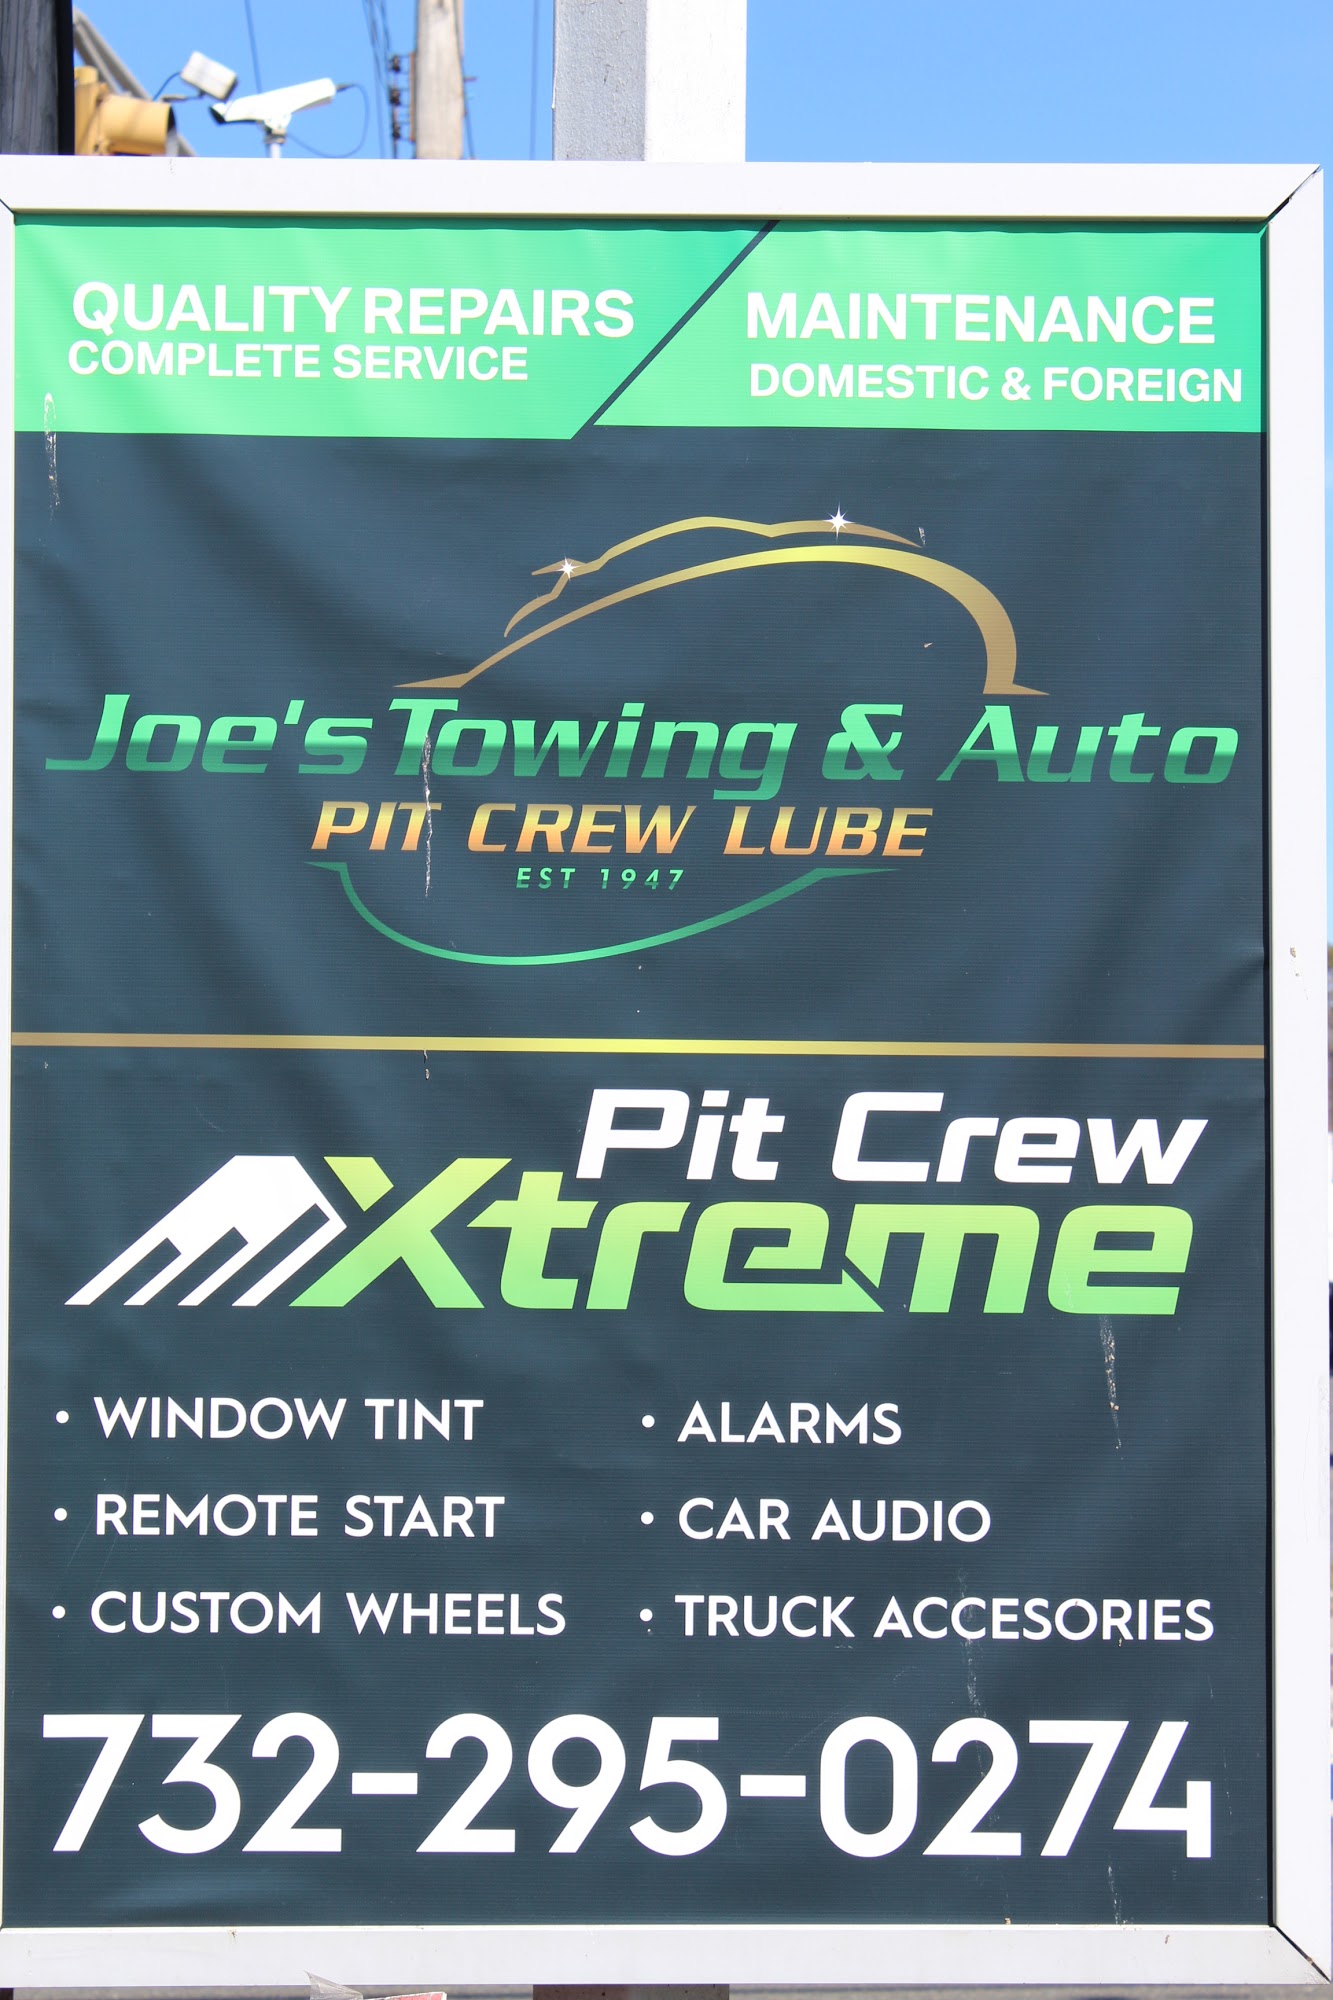 Joes Towing & Auto/Pit Crew Lube